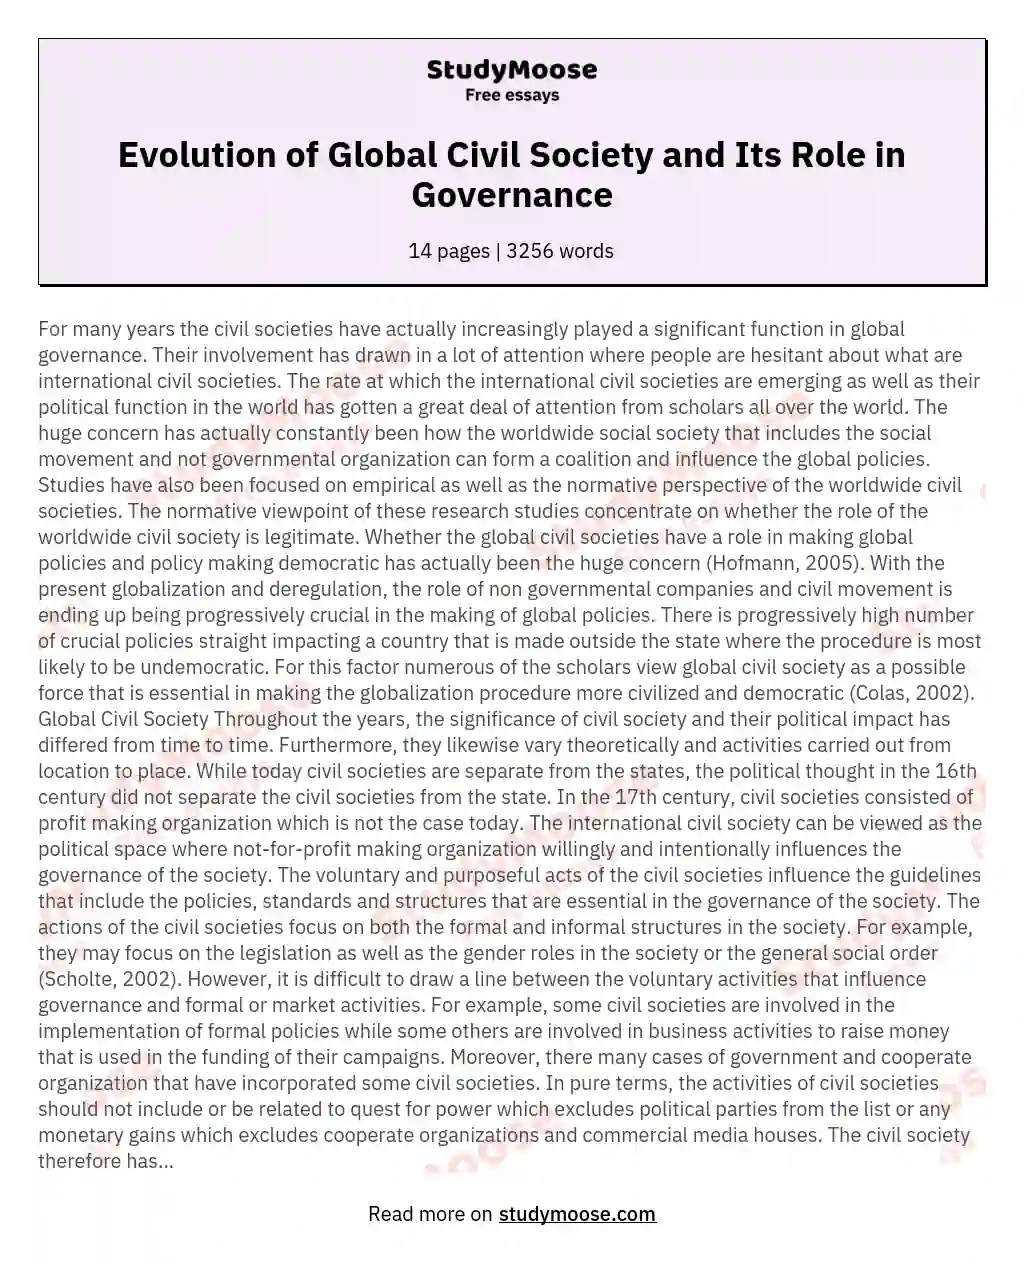 Evolution of Global Civil Society and Its Role in Governance essay